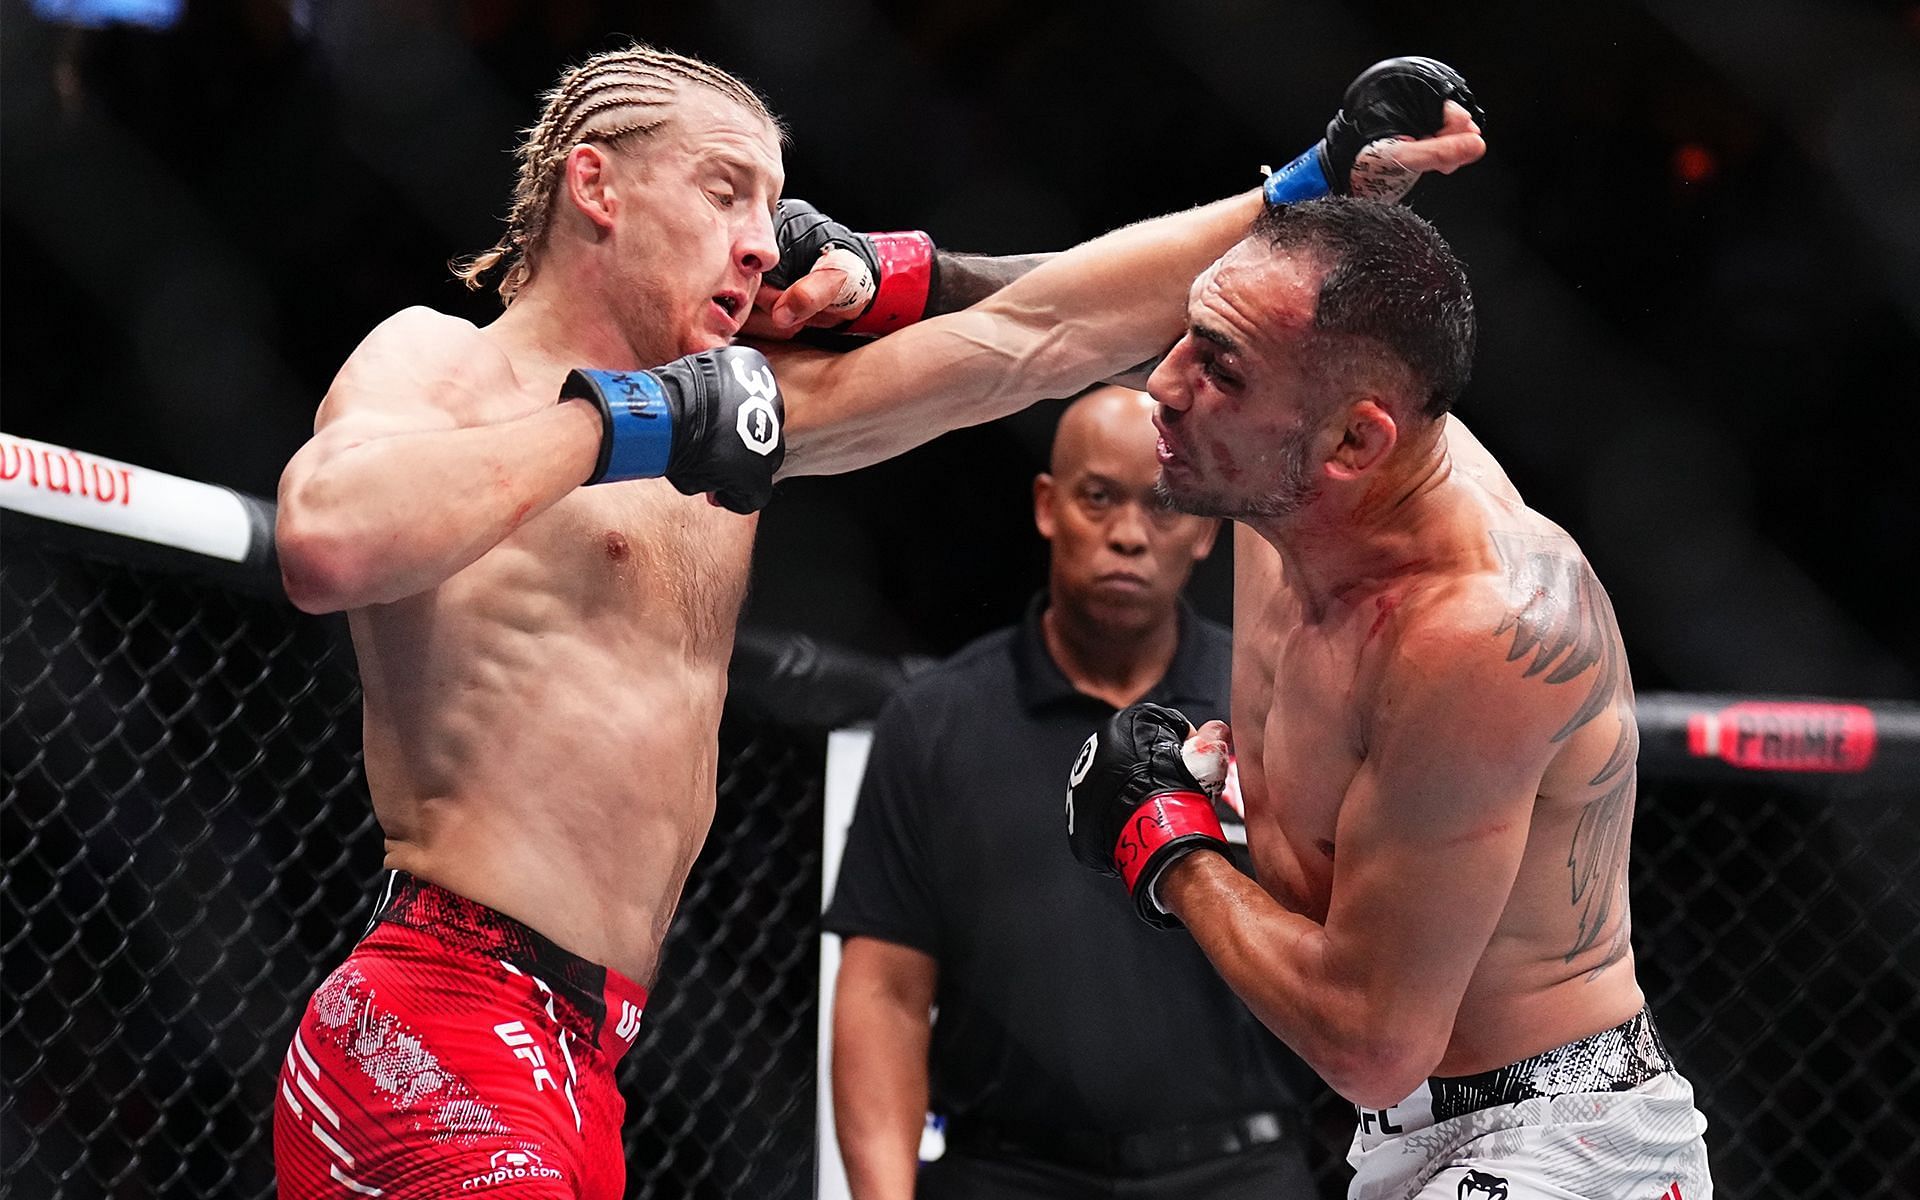 Tony Ferguson (right) issues statement after losing to Paddy Pimblett (left) (Image Courtesy: @UFC X)